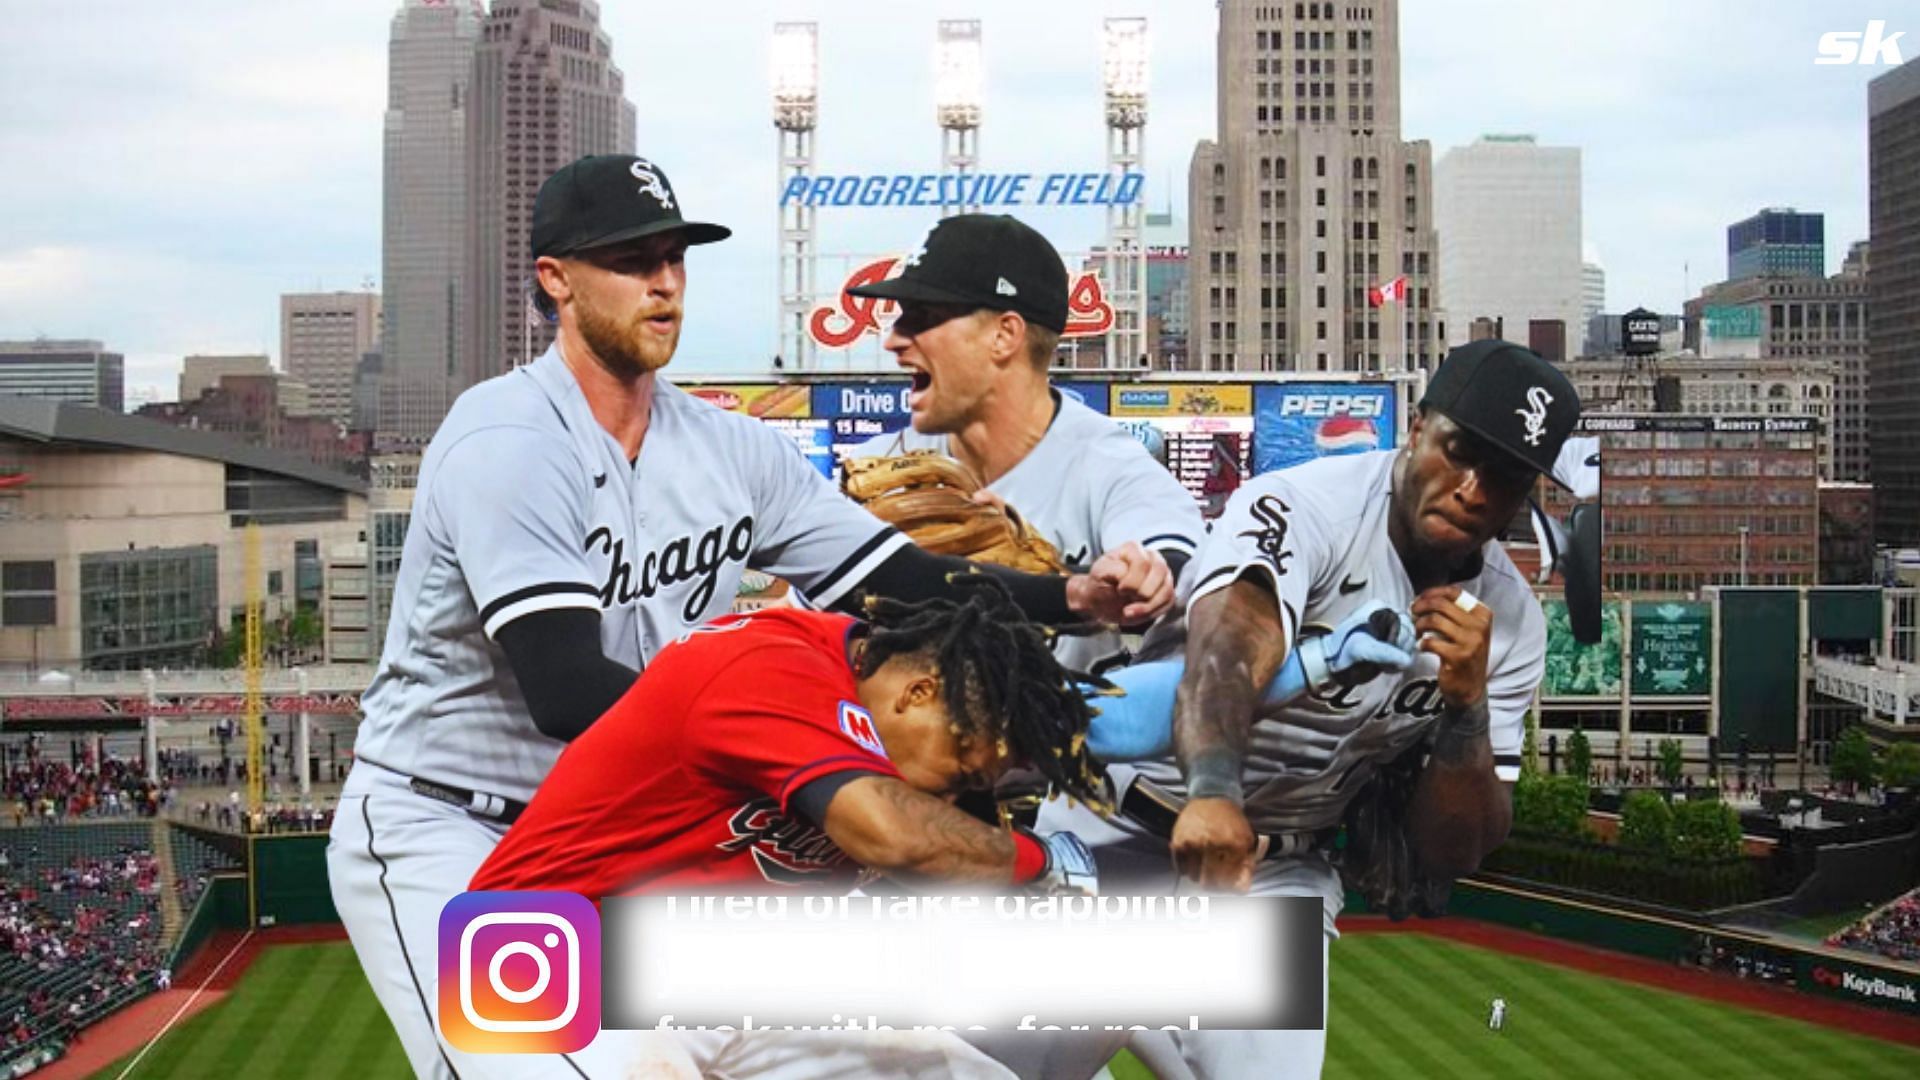 Tim Anderson silences his critics with a mysterious message after a heated altercation with Jose Ramirez erupts into a wild brawl on the field.